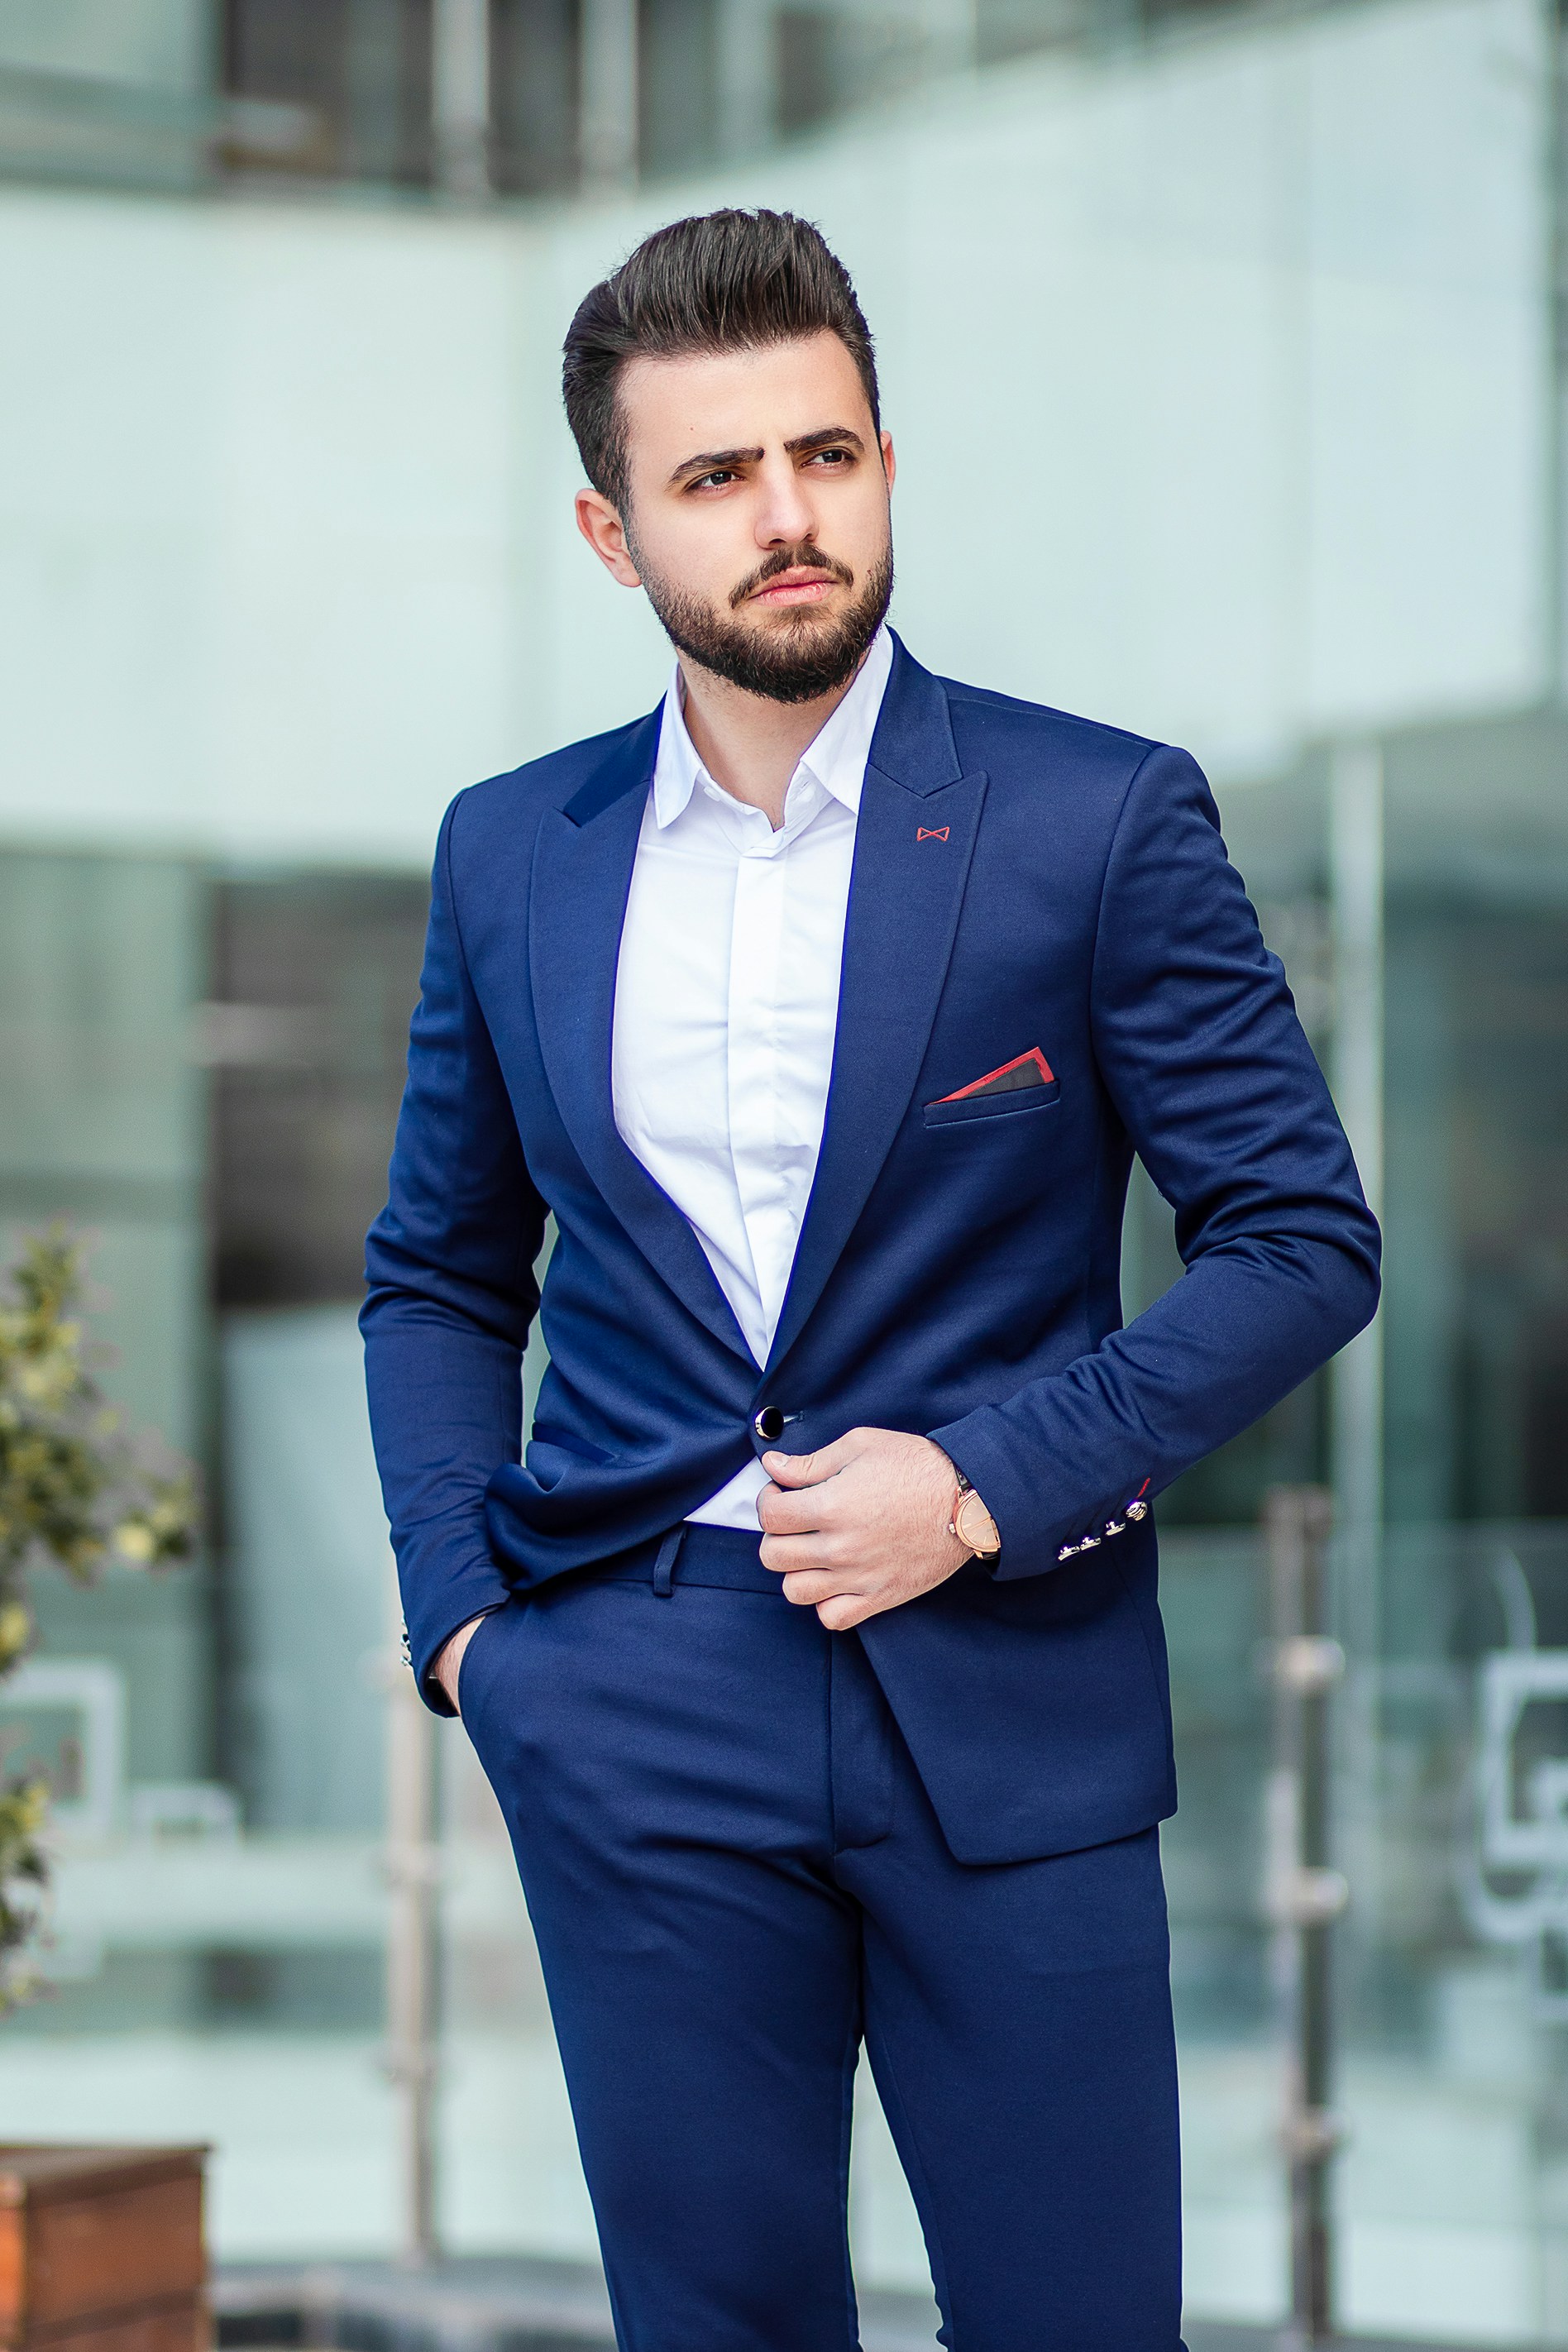 A young man in a suit | Source: Unsplash